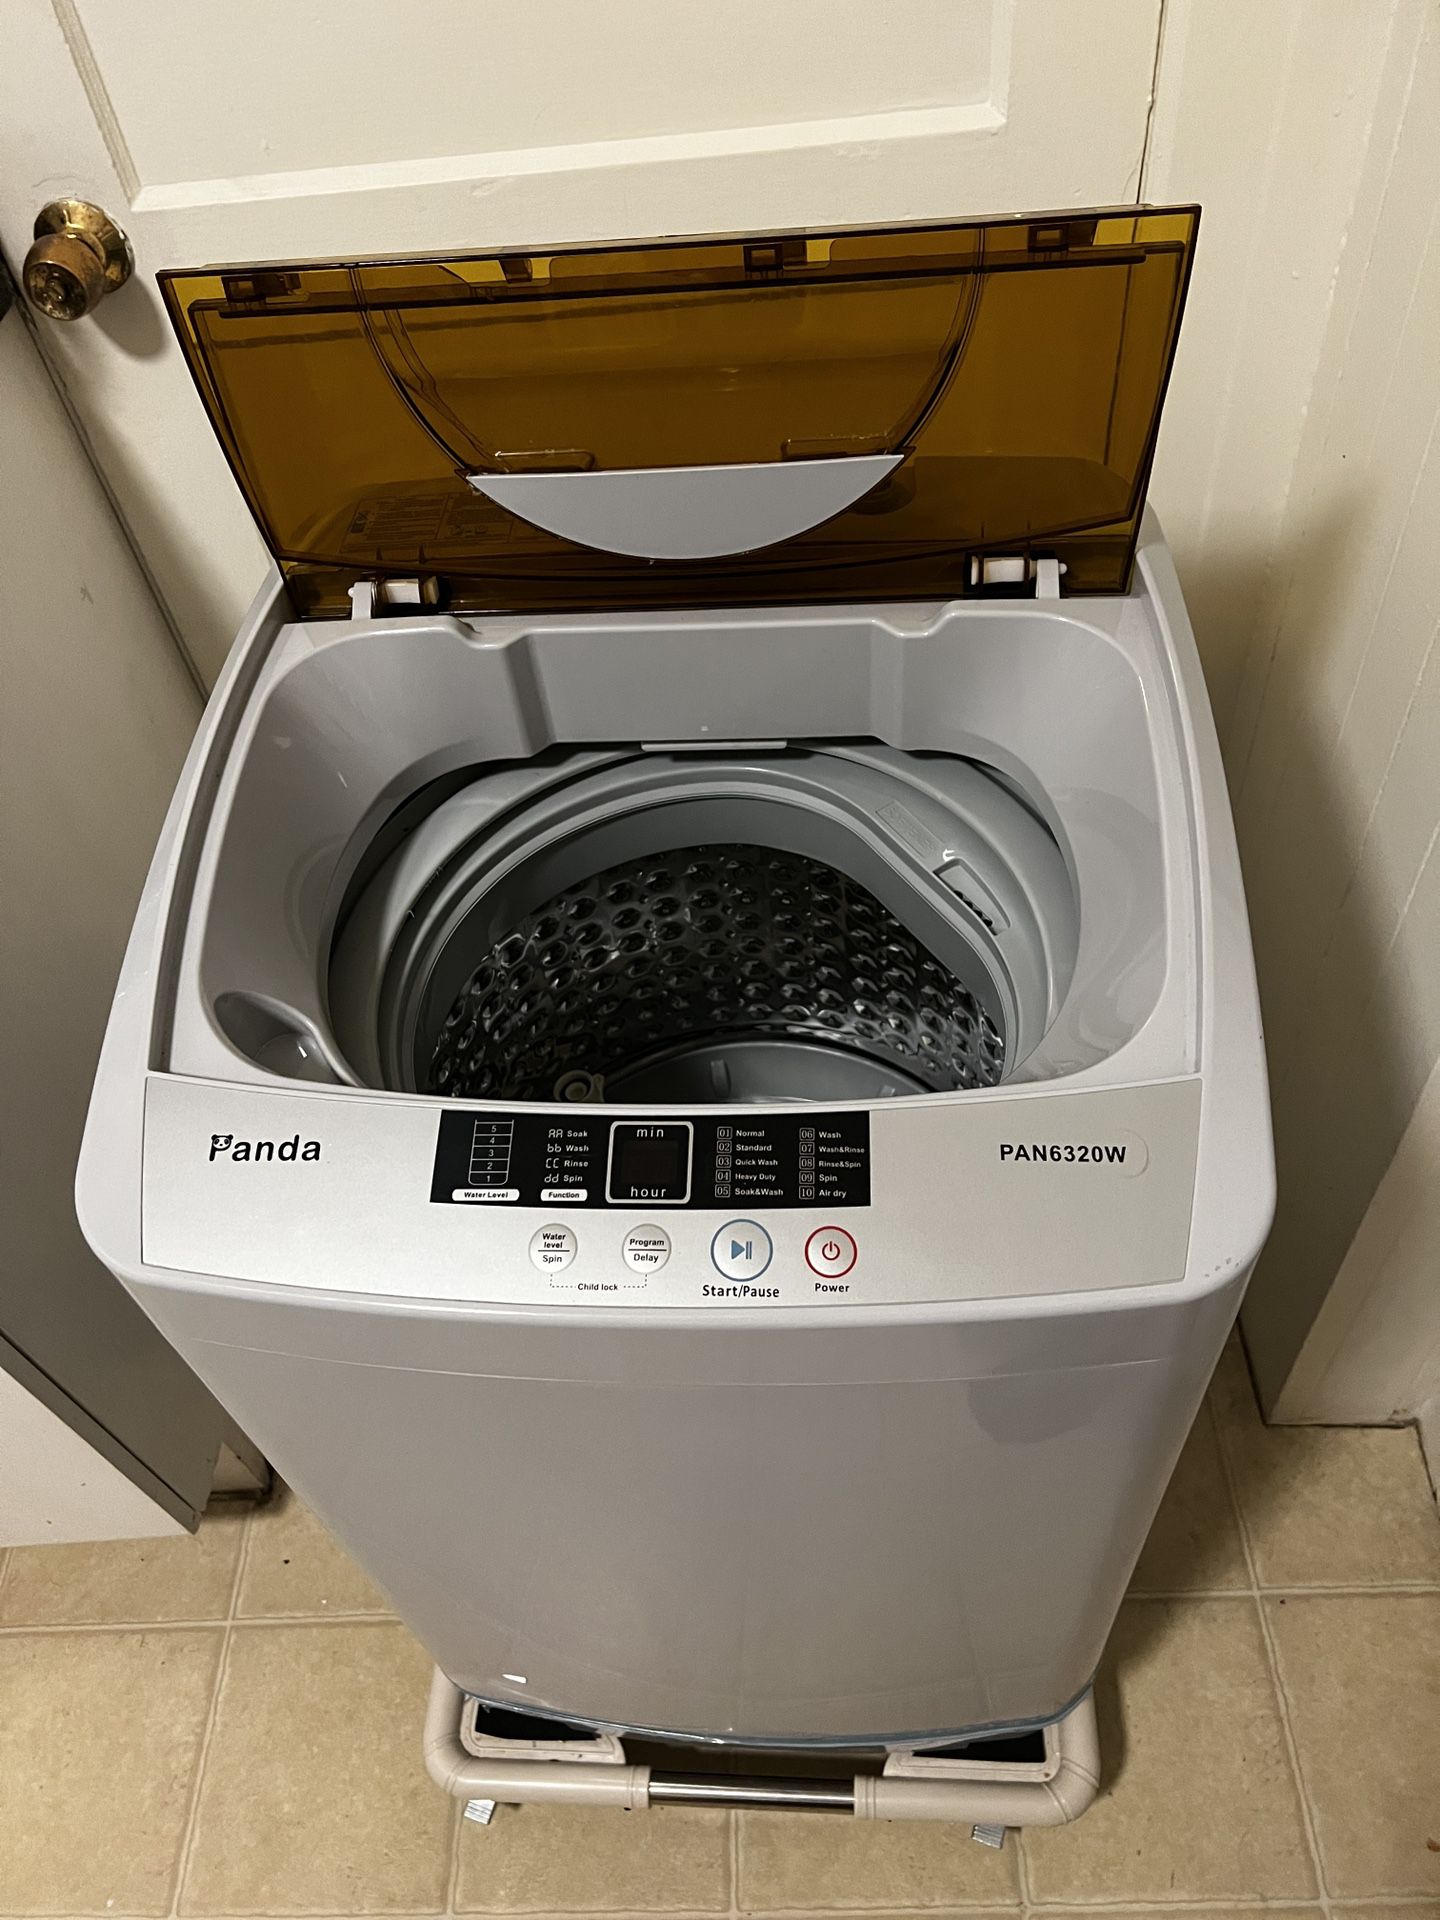 Comfee Portable Washing Machine (NEED TO MOVE SO GETTING RID ASAP) for Sale  in The Bronx, NY - OfferUp